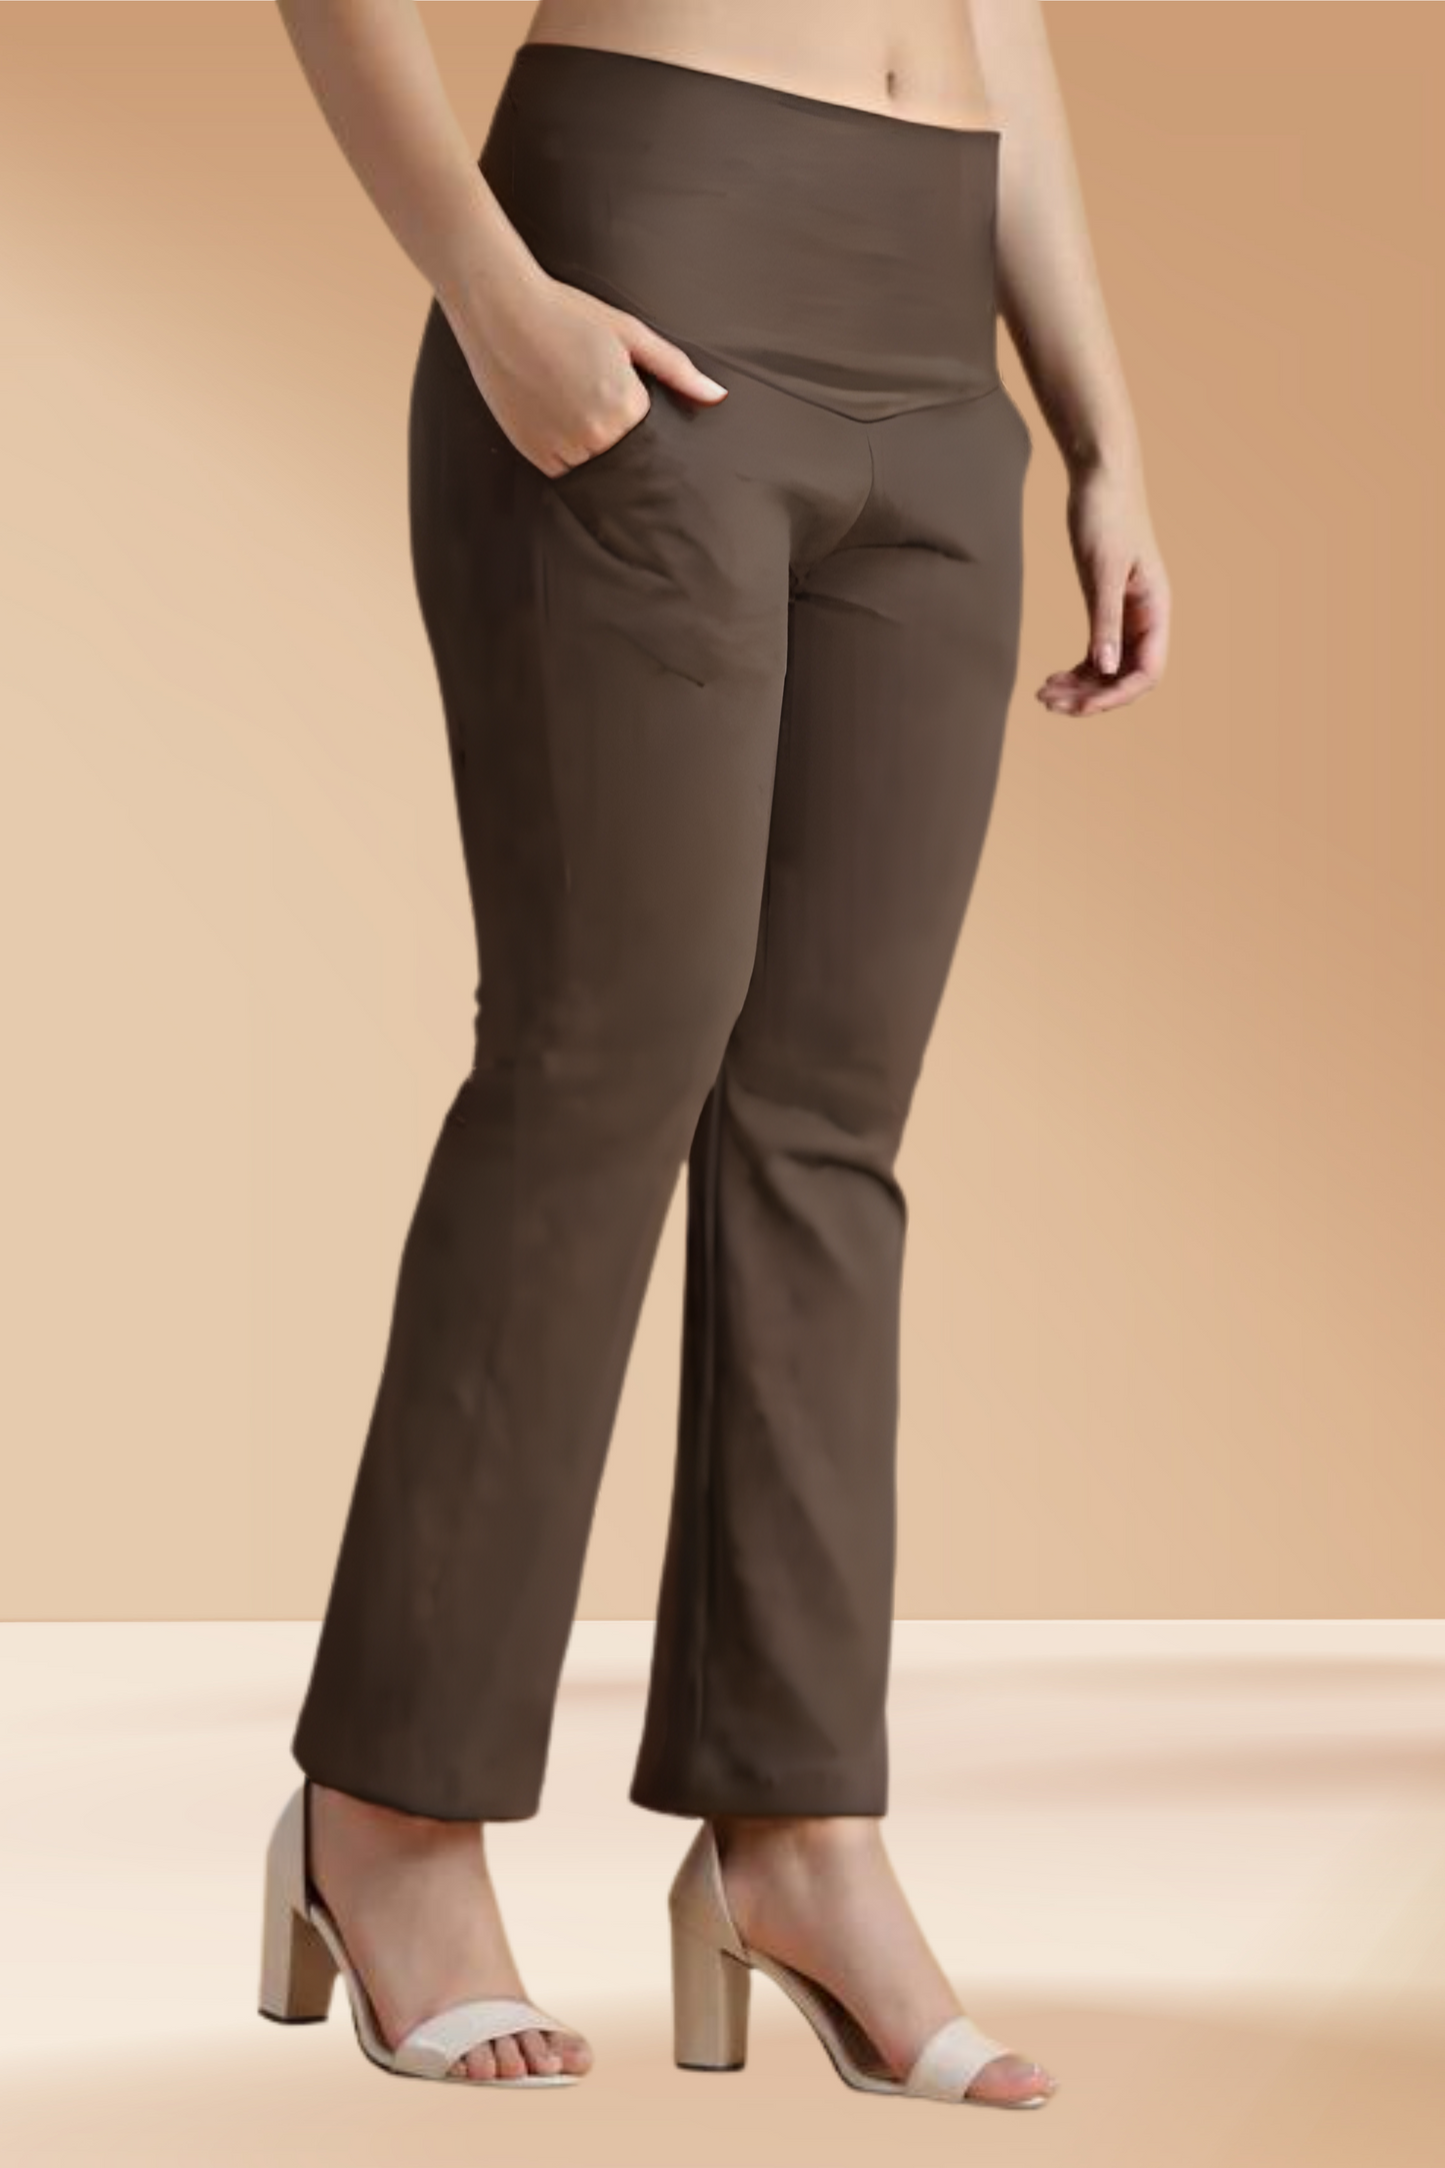 Buy High Waisted Pants & Best Tummy Tucker For Womens - Apella